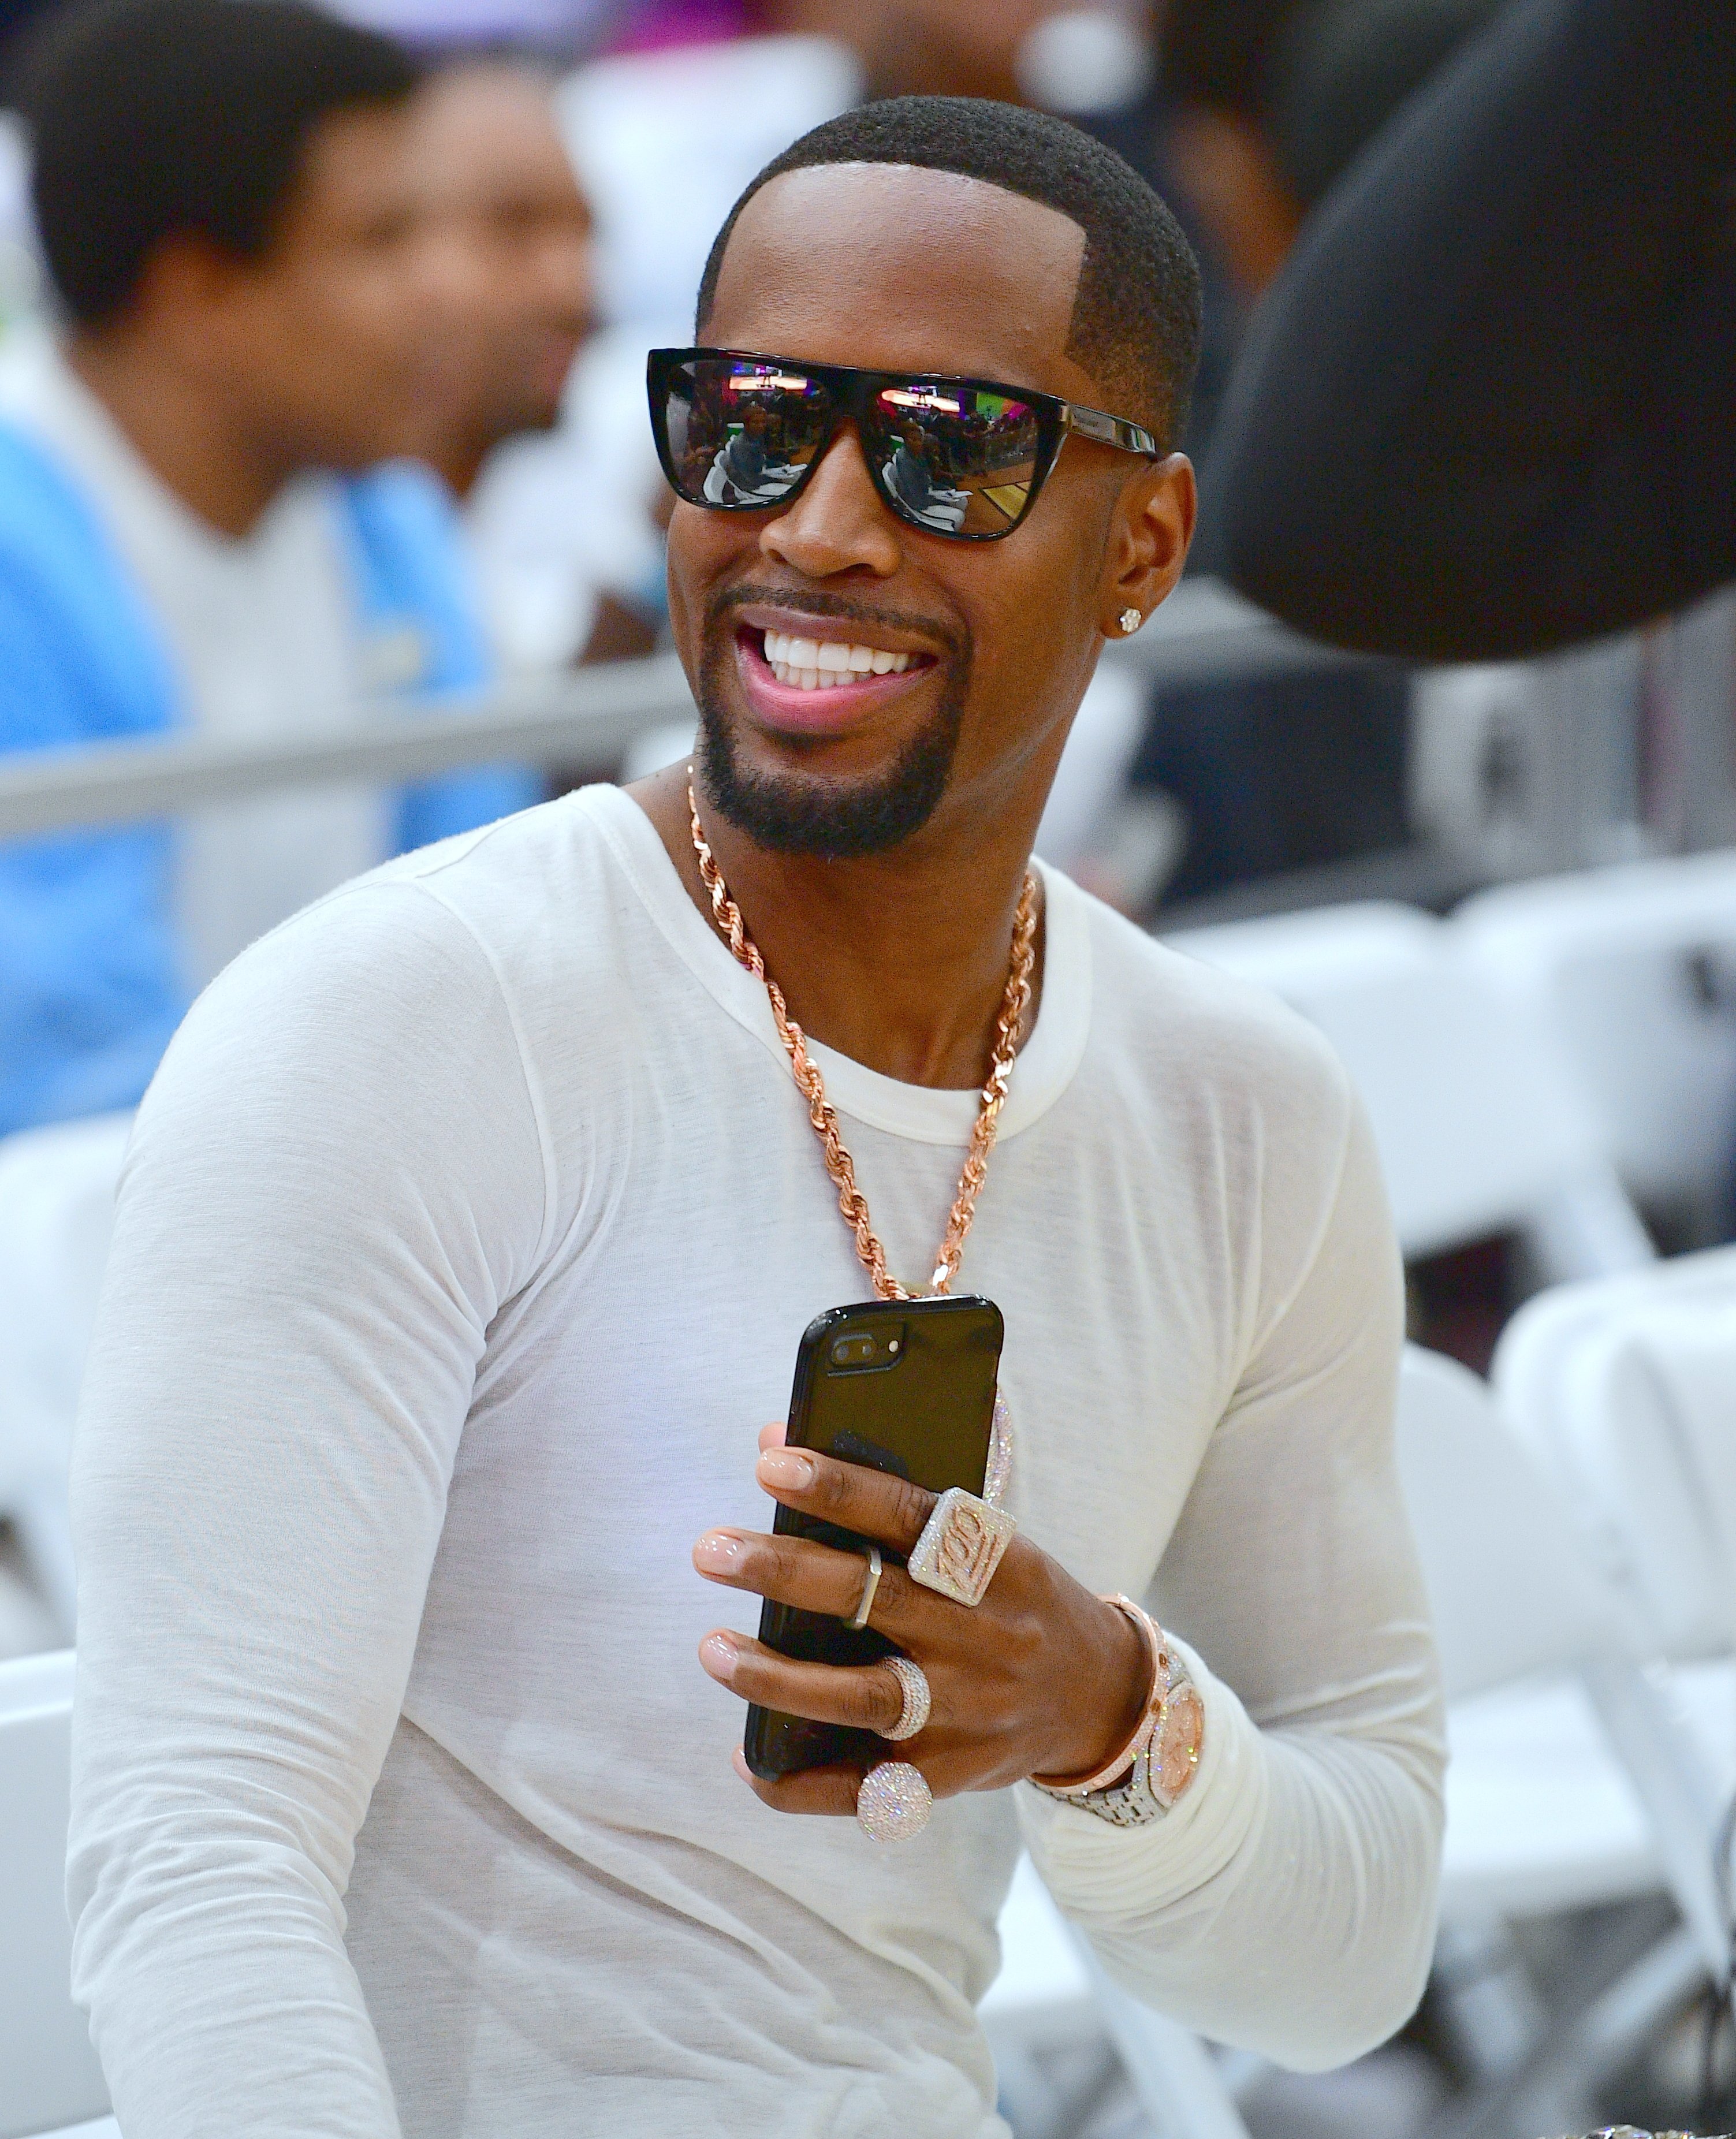 Safaree Samuels at the 2018 BET Experience at the Los Angeles Convention Center on June 23, 2018 in Los Angeles, California | Photo: Getty Images